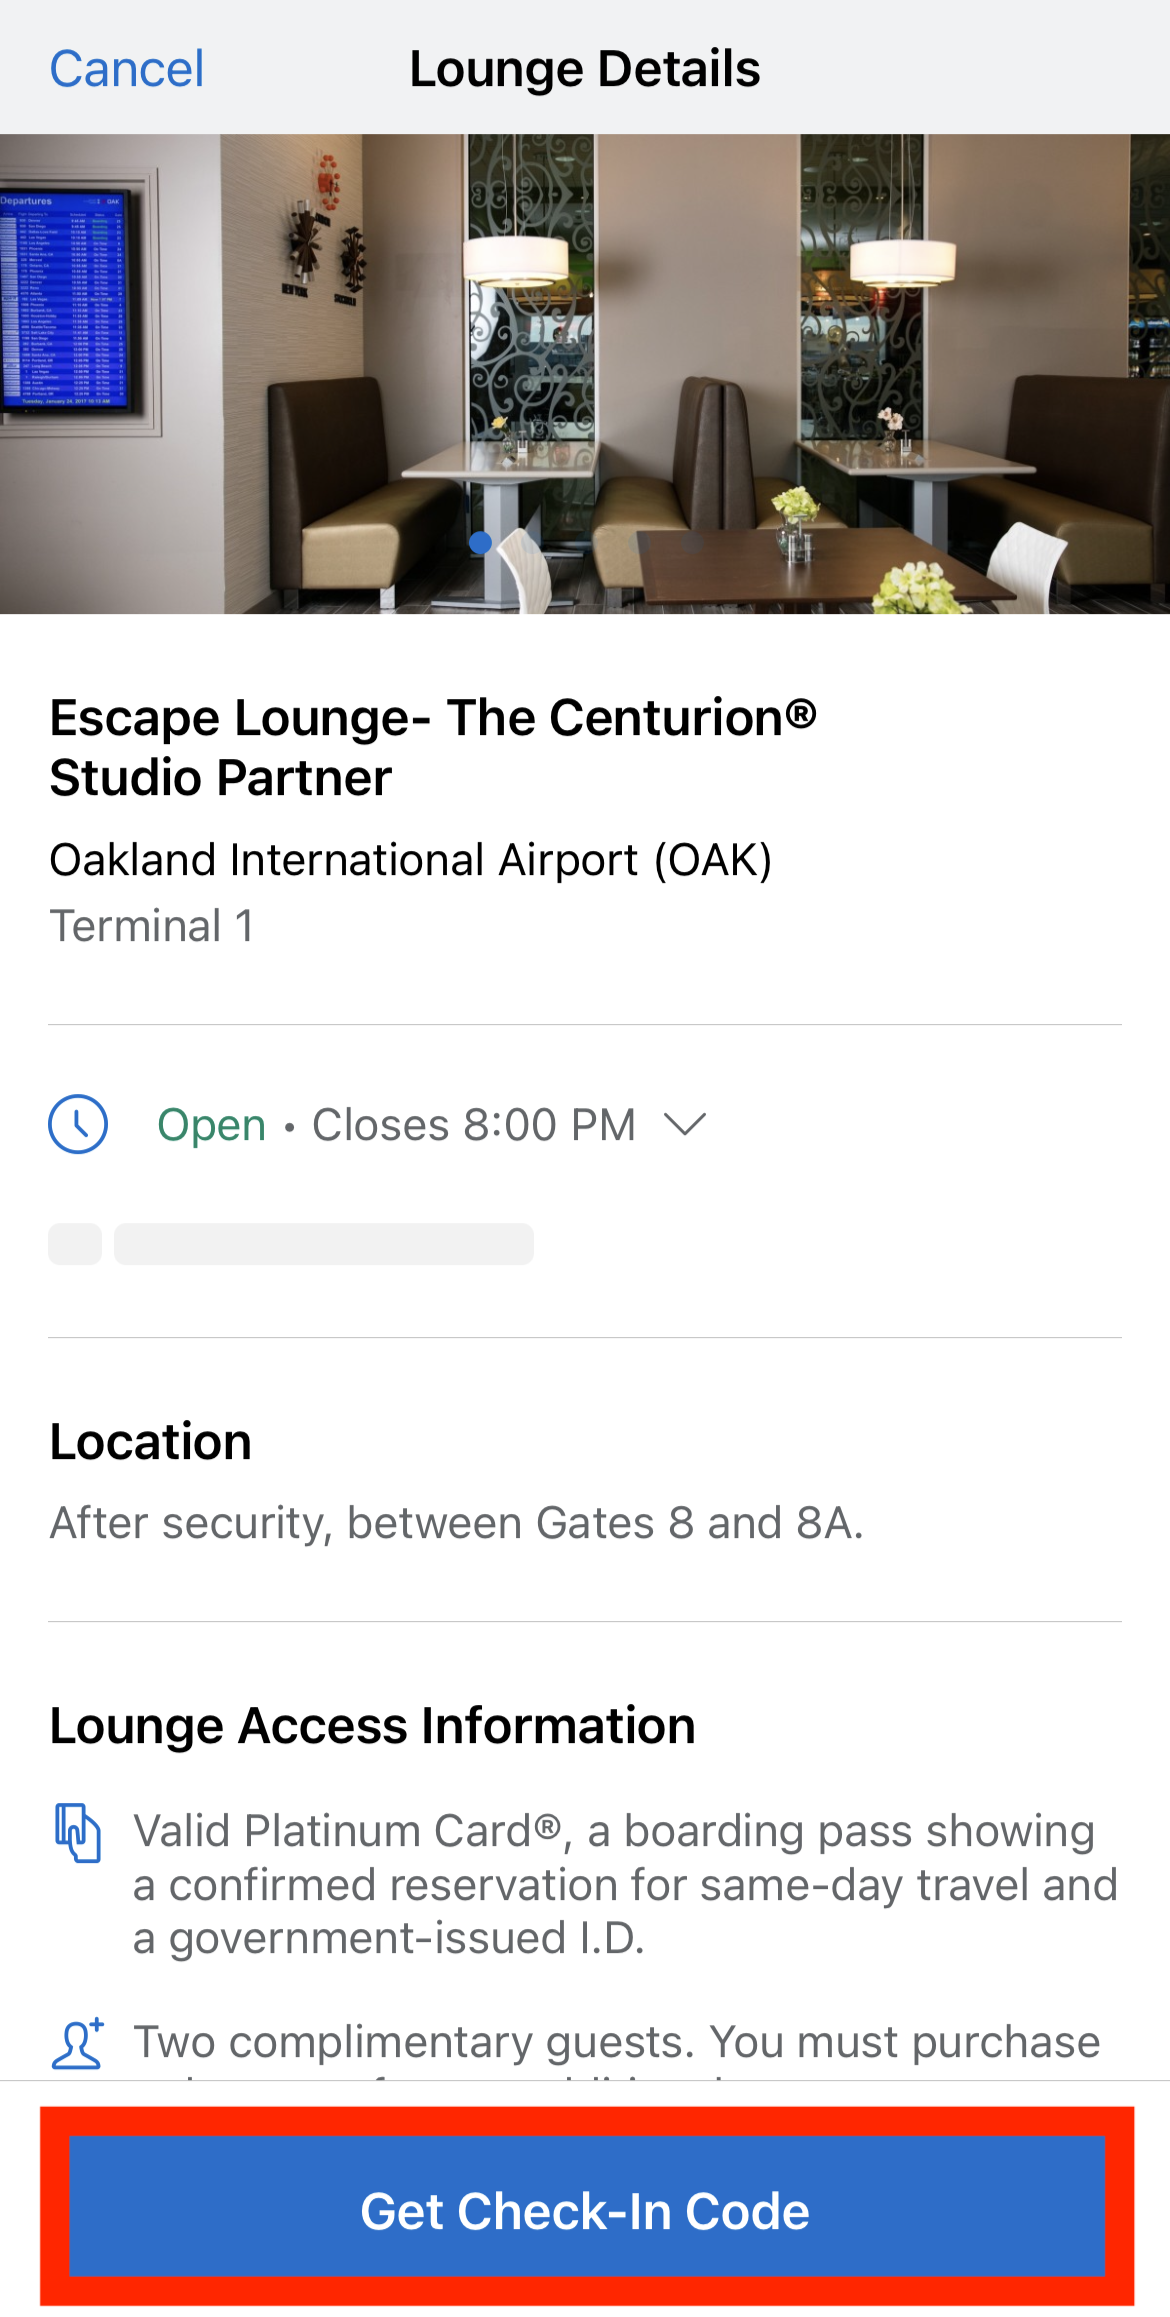 Book a lounge on the Amex App